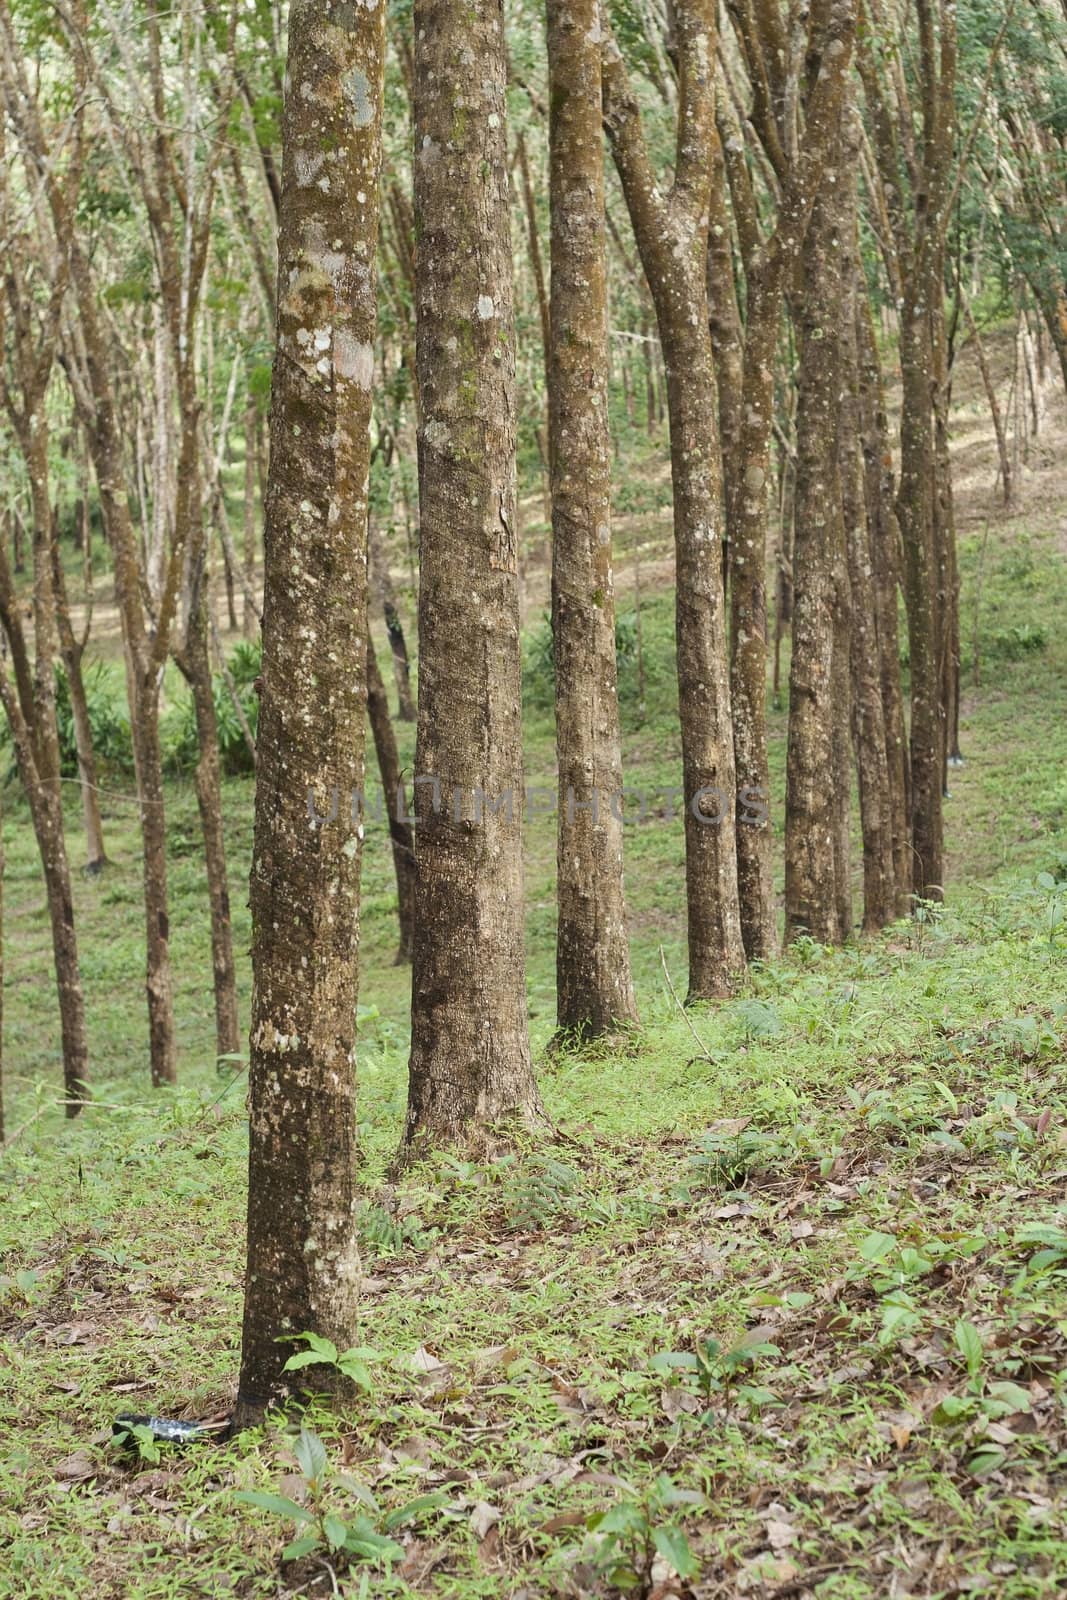 Rubber forest